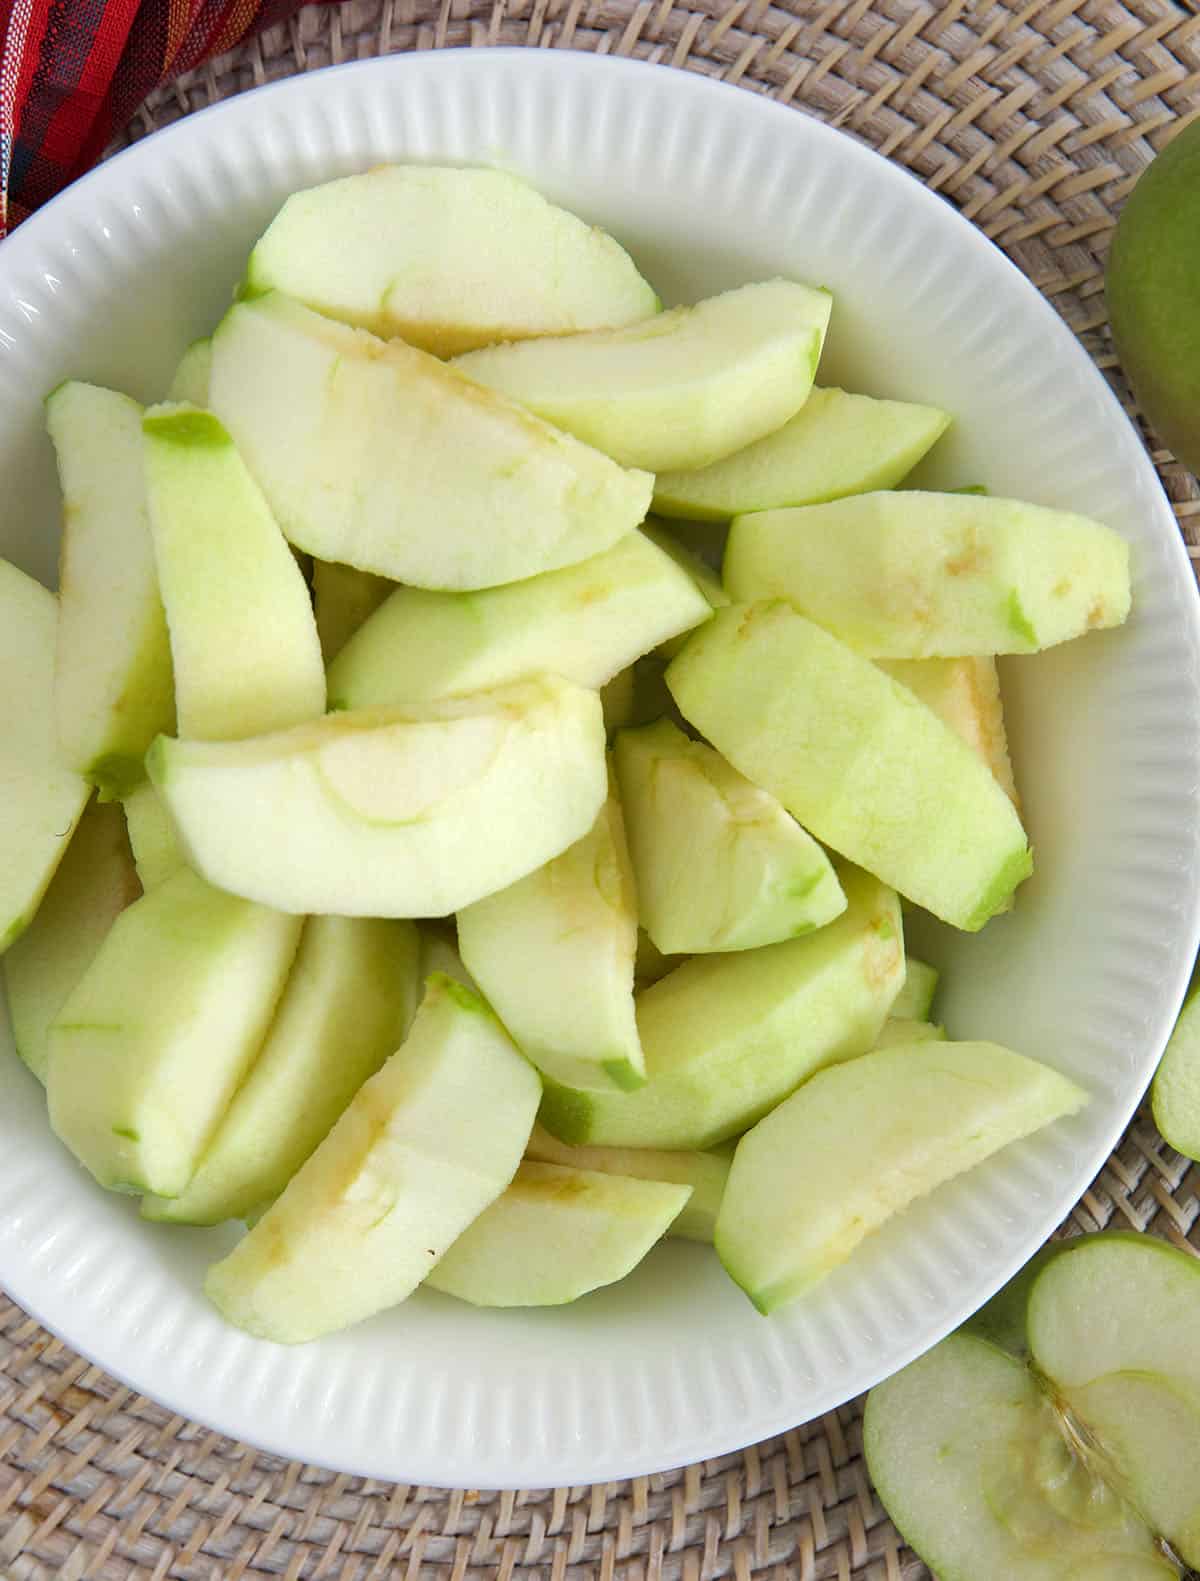 Peeled apples are placed in a bowl.